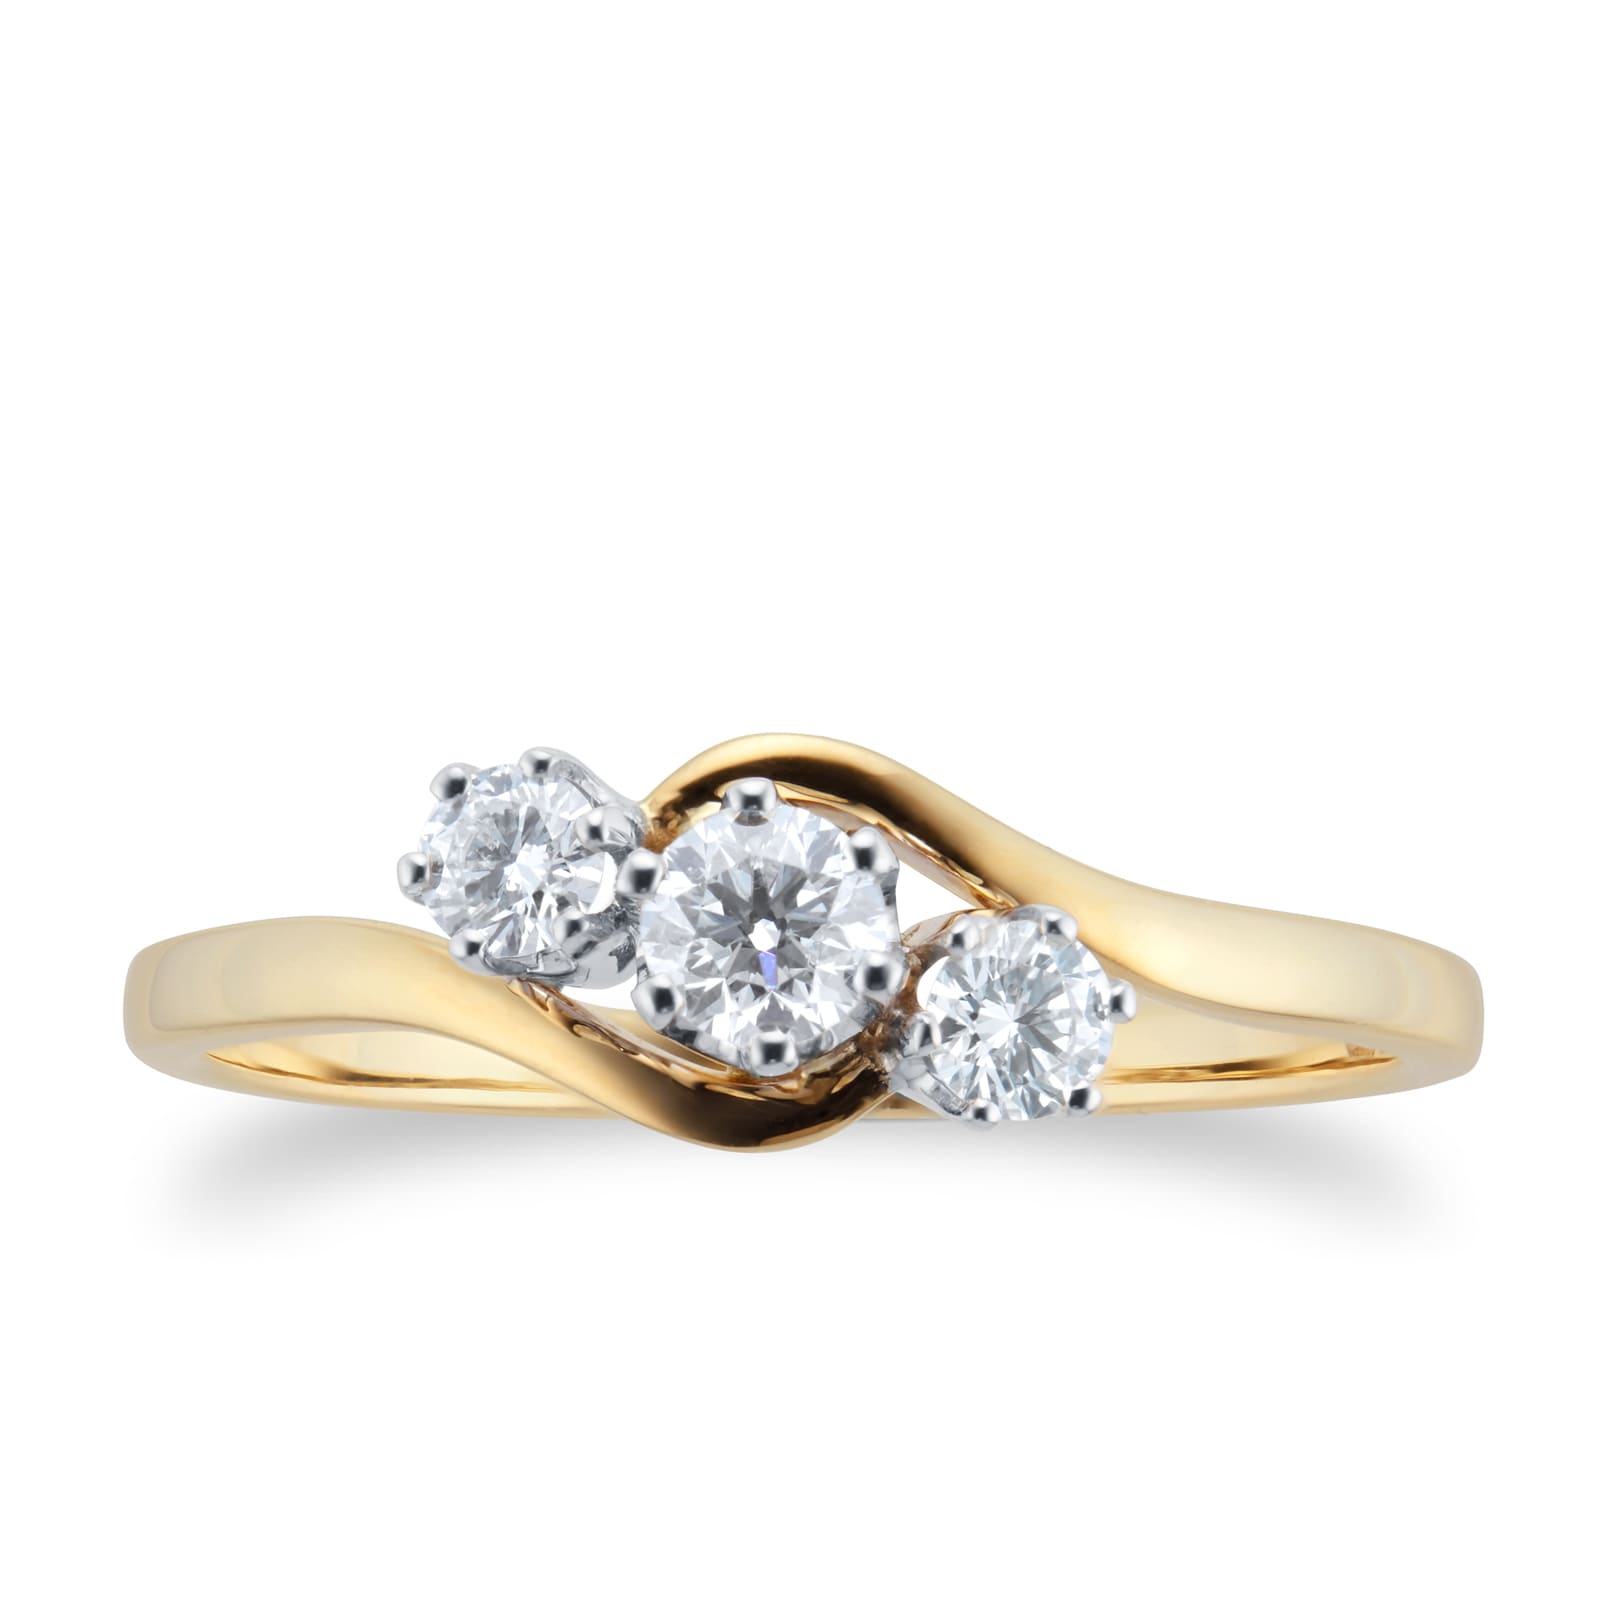 18ct Yellow Gold 0.50cttw Brilliant Cut 3 Stone Diamond Ring - Ring Size A.5